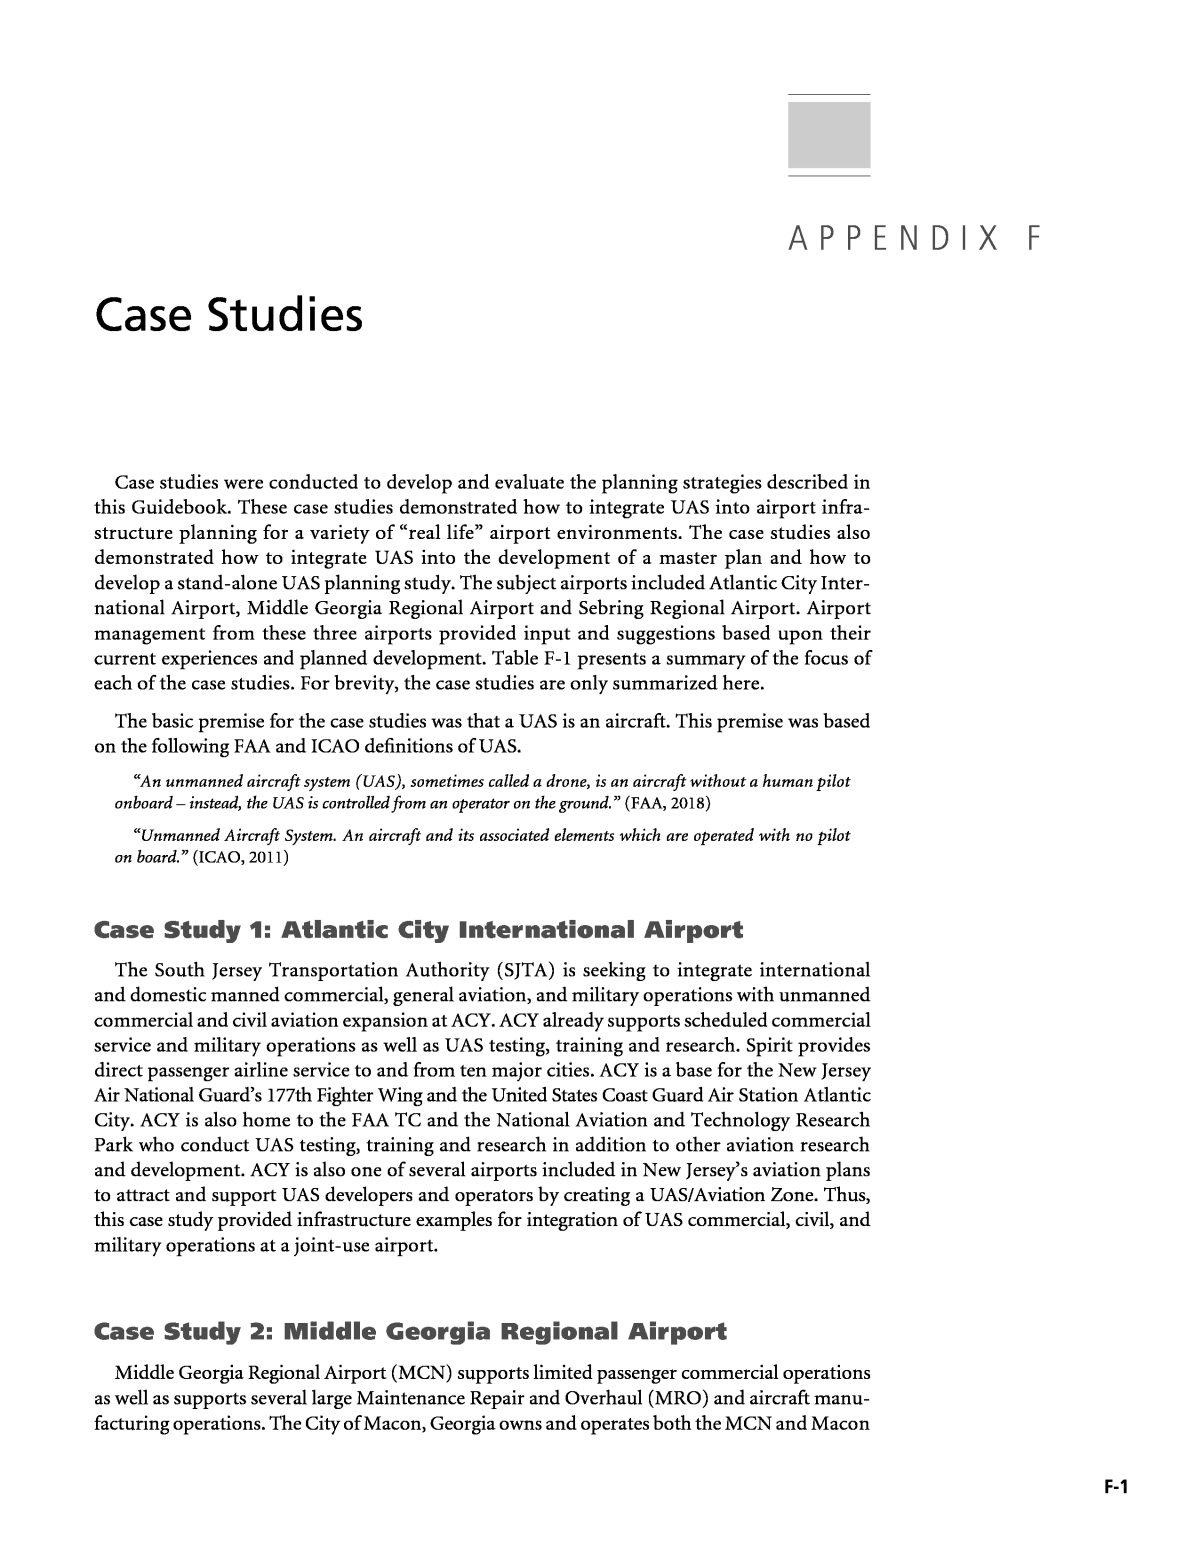 Appendix F - Case Studies | Airports and Unmanned Aircraft Systems